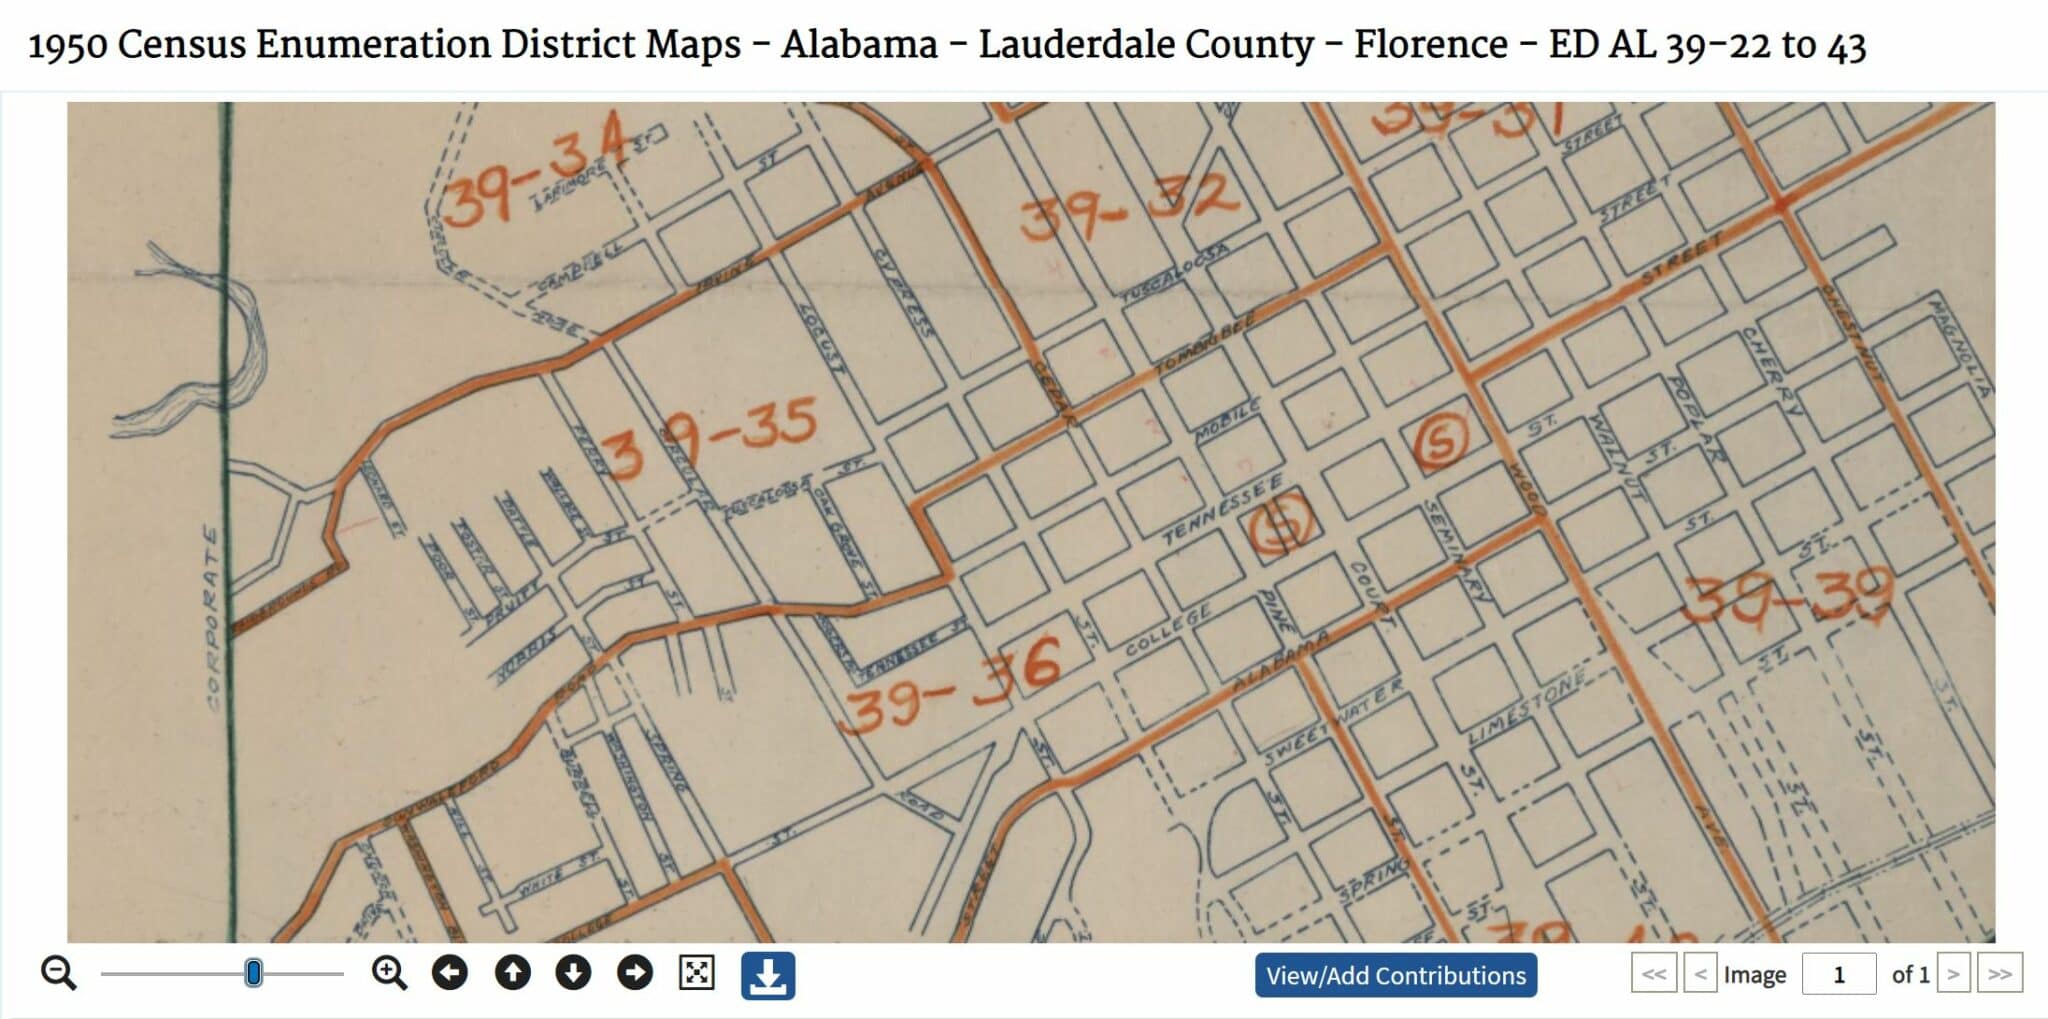 Section of Lauderdale County, Alabama Enumeration District Map from National Archives